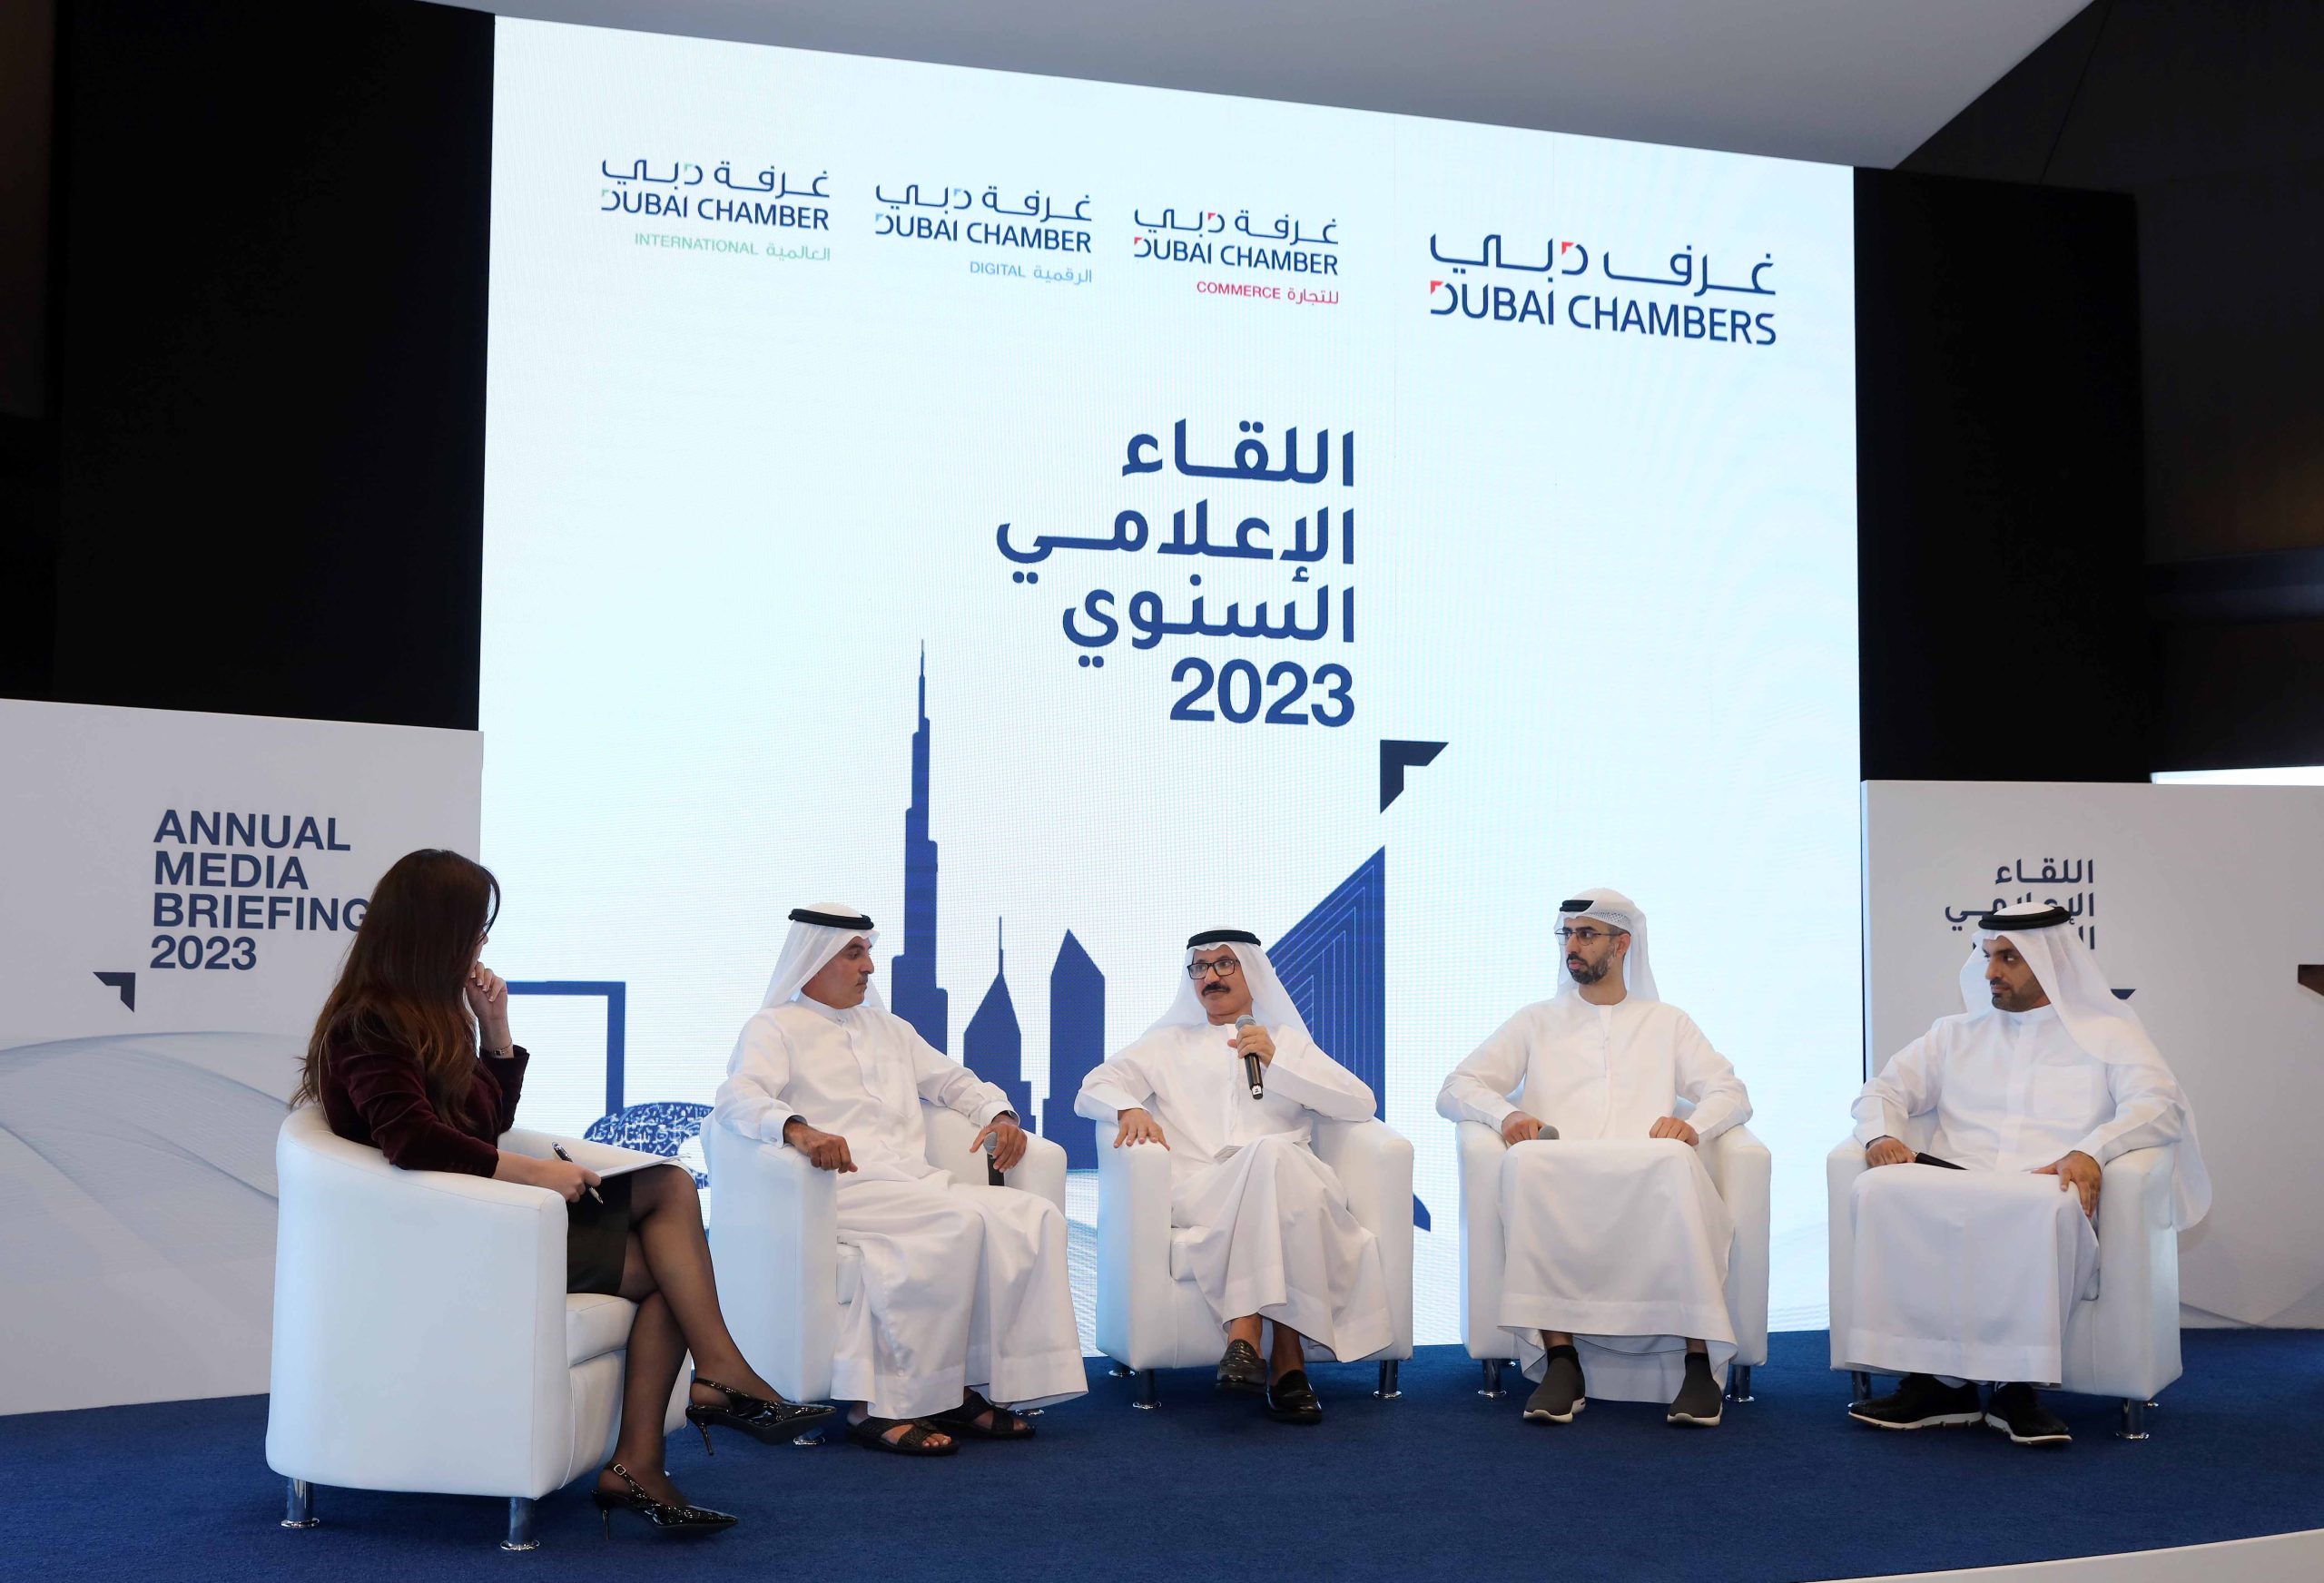 Dubai Chambers’ membership grows by 20% to 347,600 while members’ exports and re-exports grow 20% to exceed AED272 billion in 2022